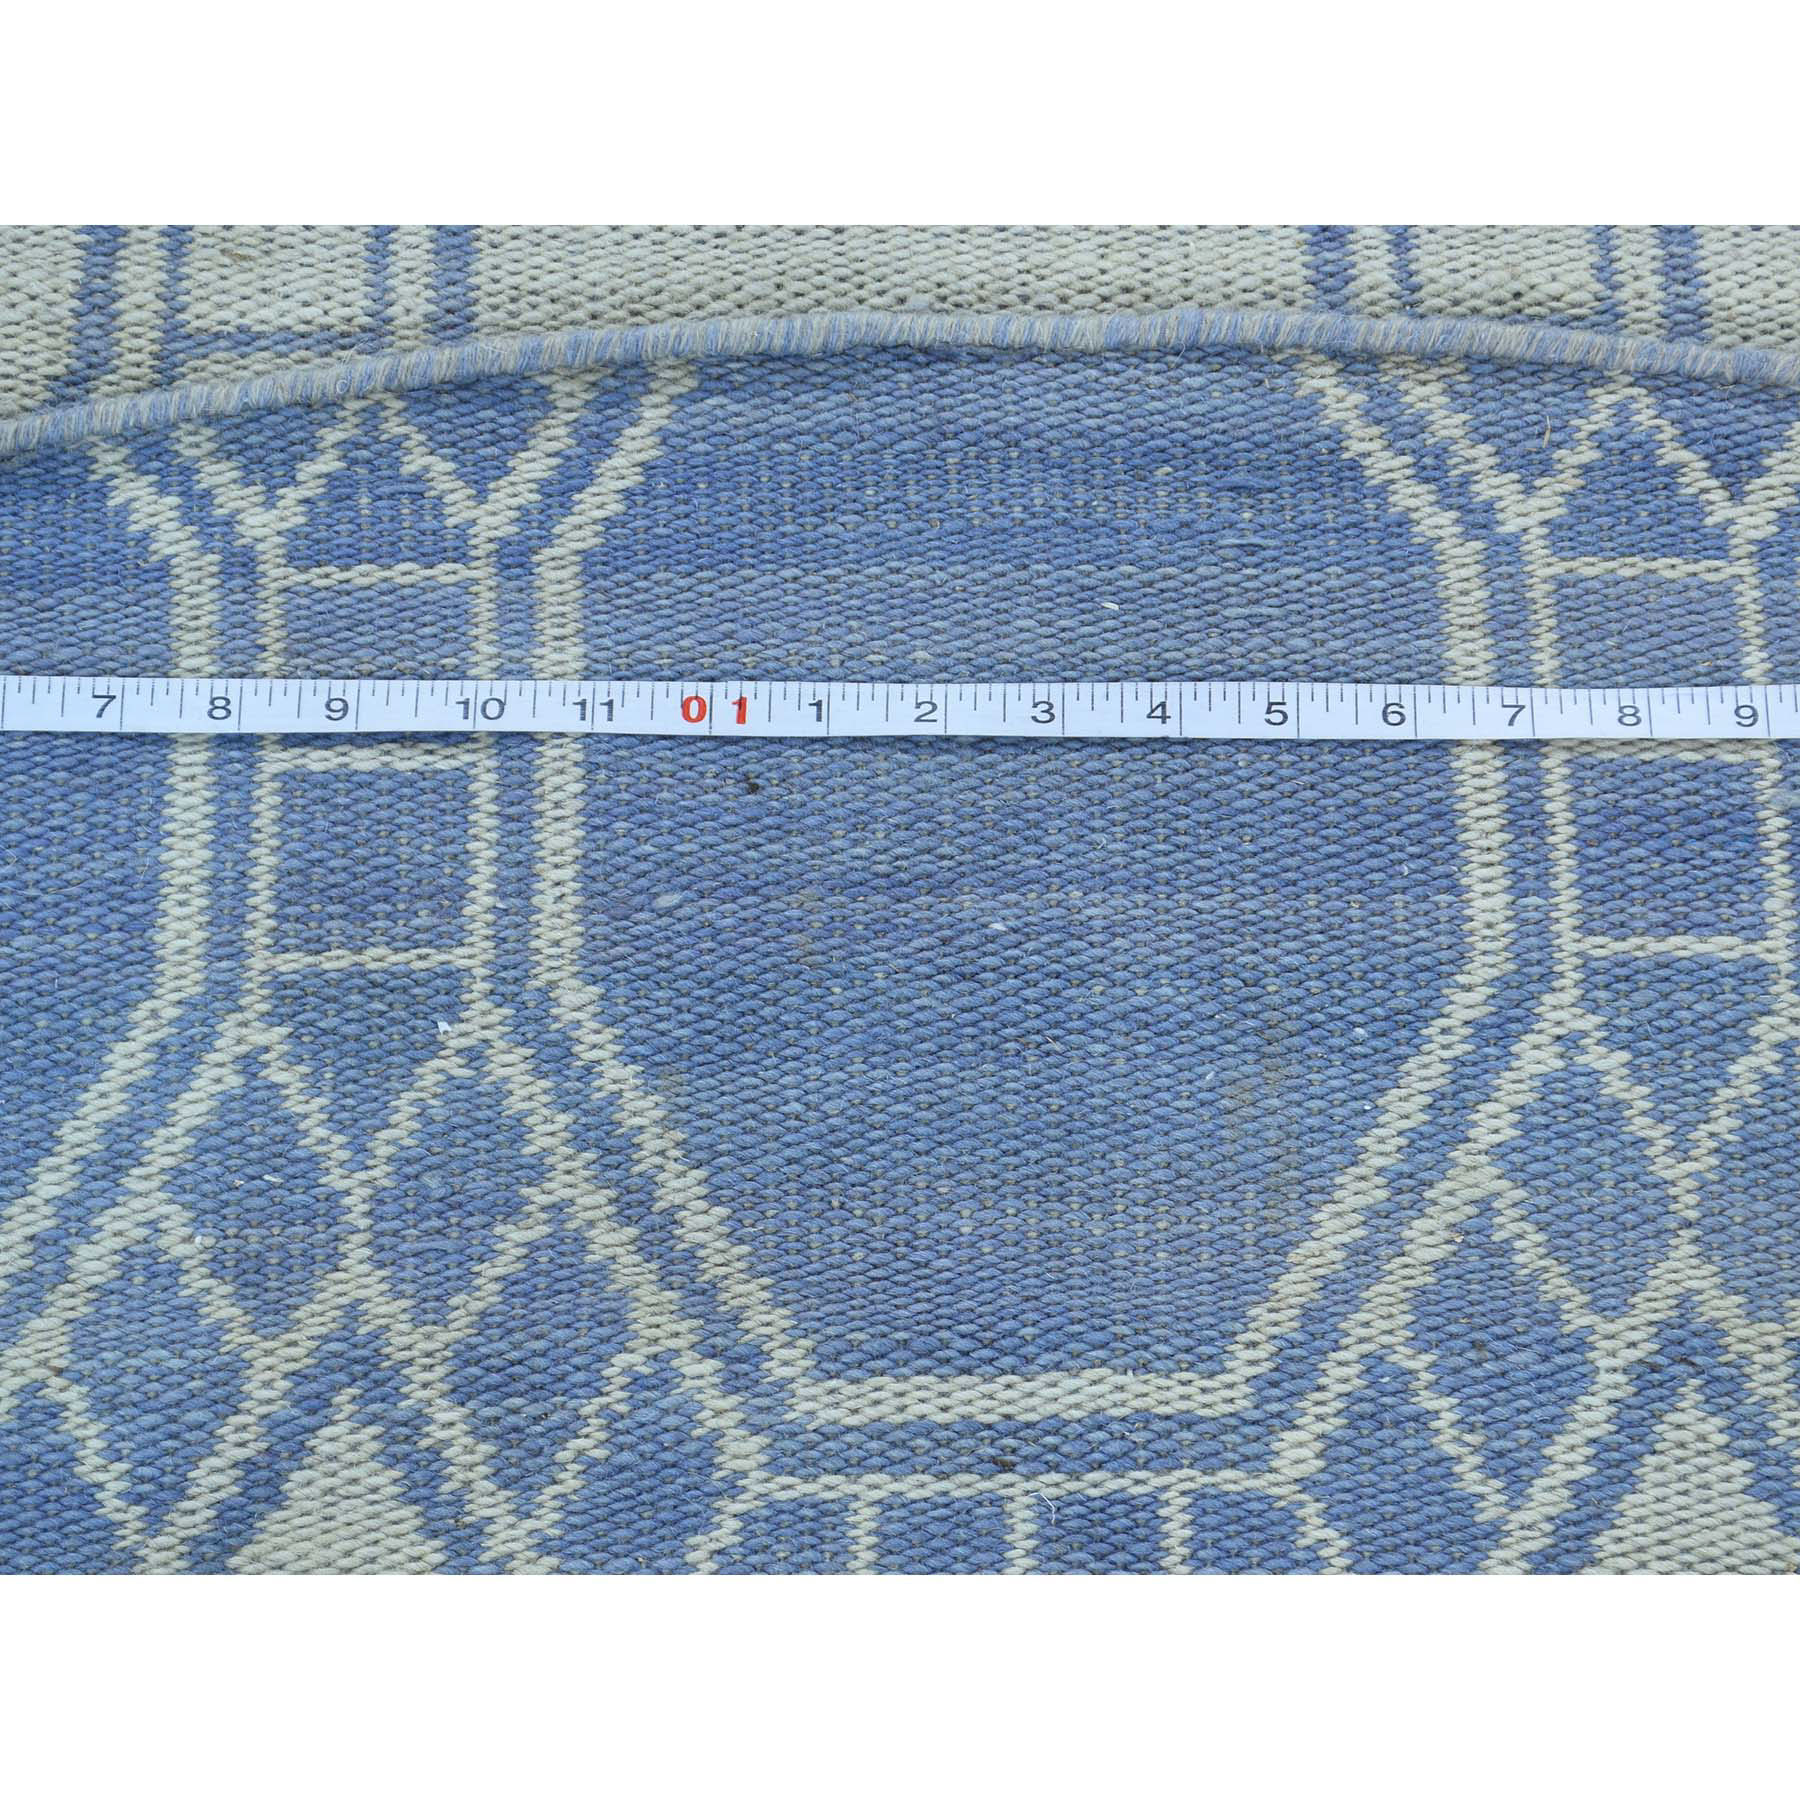 9'8"x9'8" Hand-Woven Flat Weave Reversible Durie Kilim Round Oriental Rug 